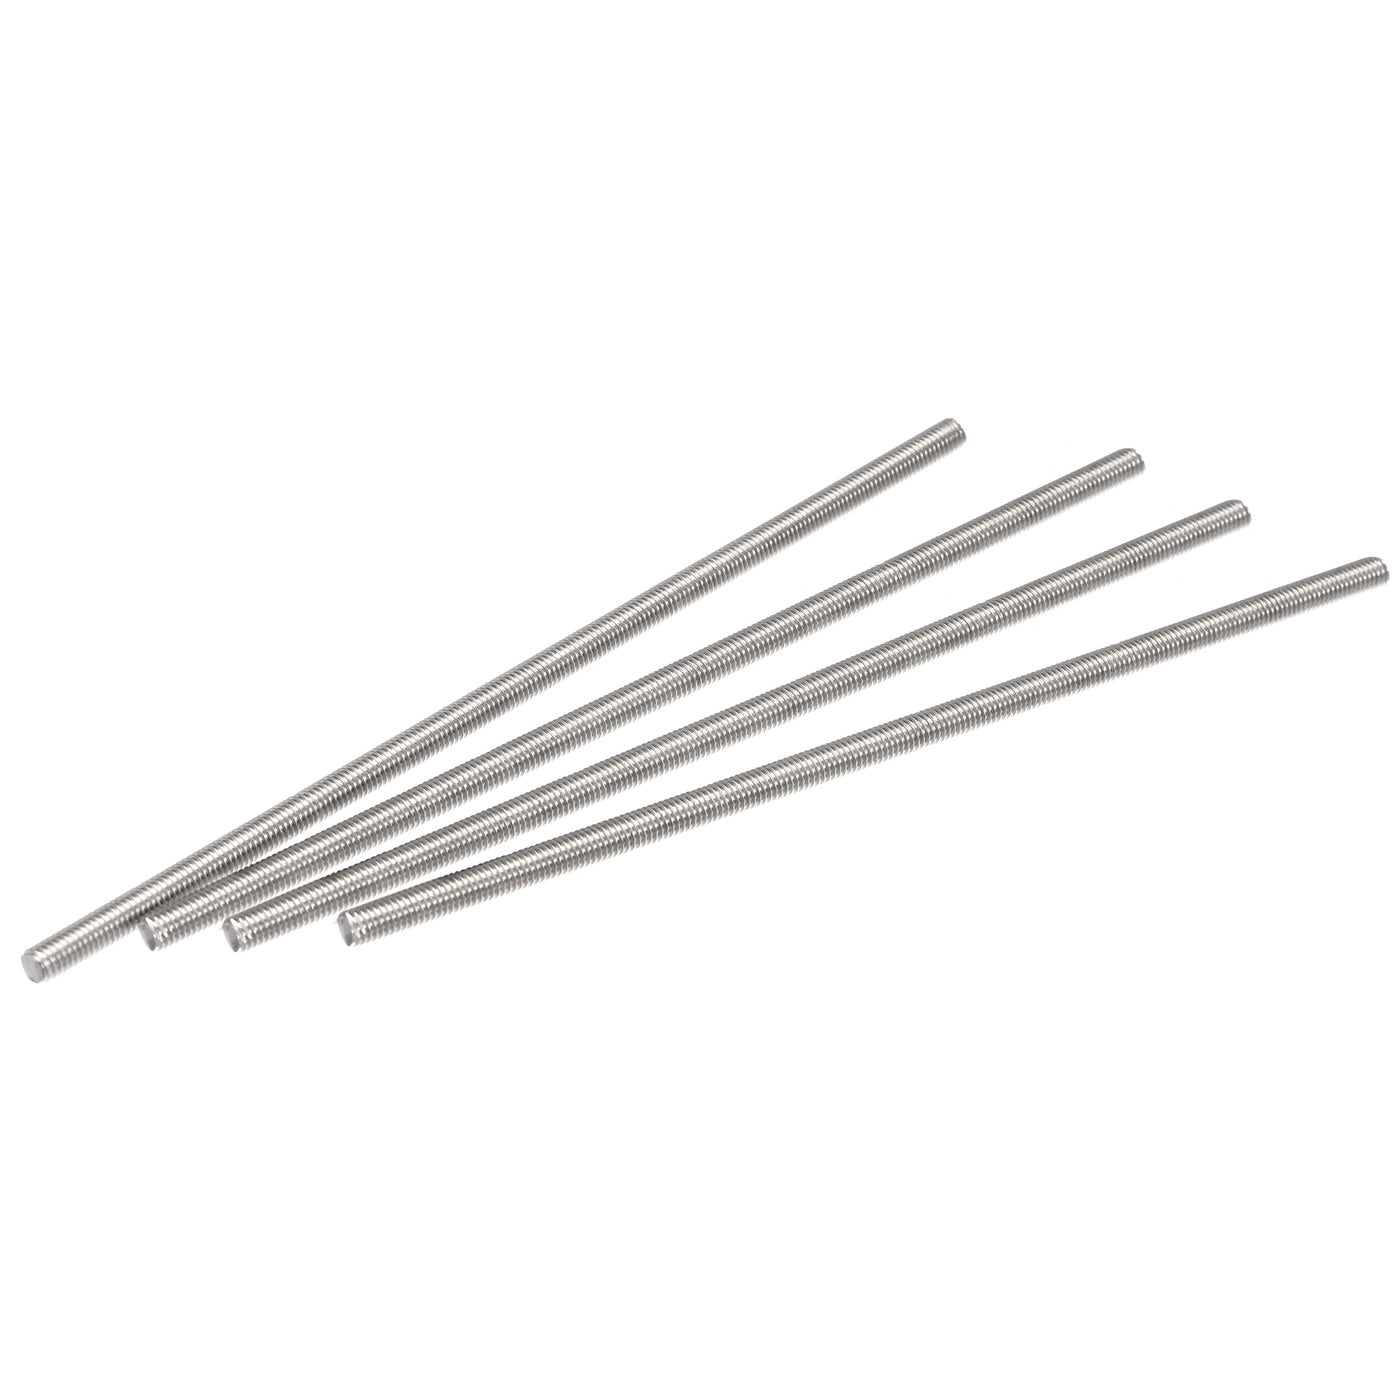 uxcell Uxcell 4pcs M6 x 200mm Fully Threaded Rod 304 Stainless Steel Right Hand Threads